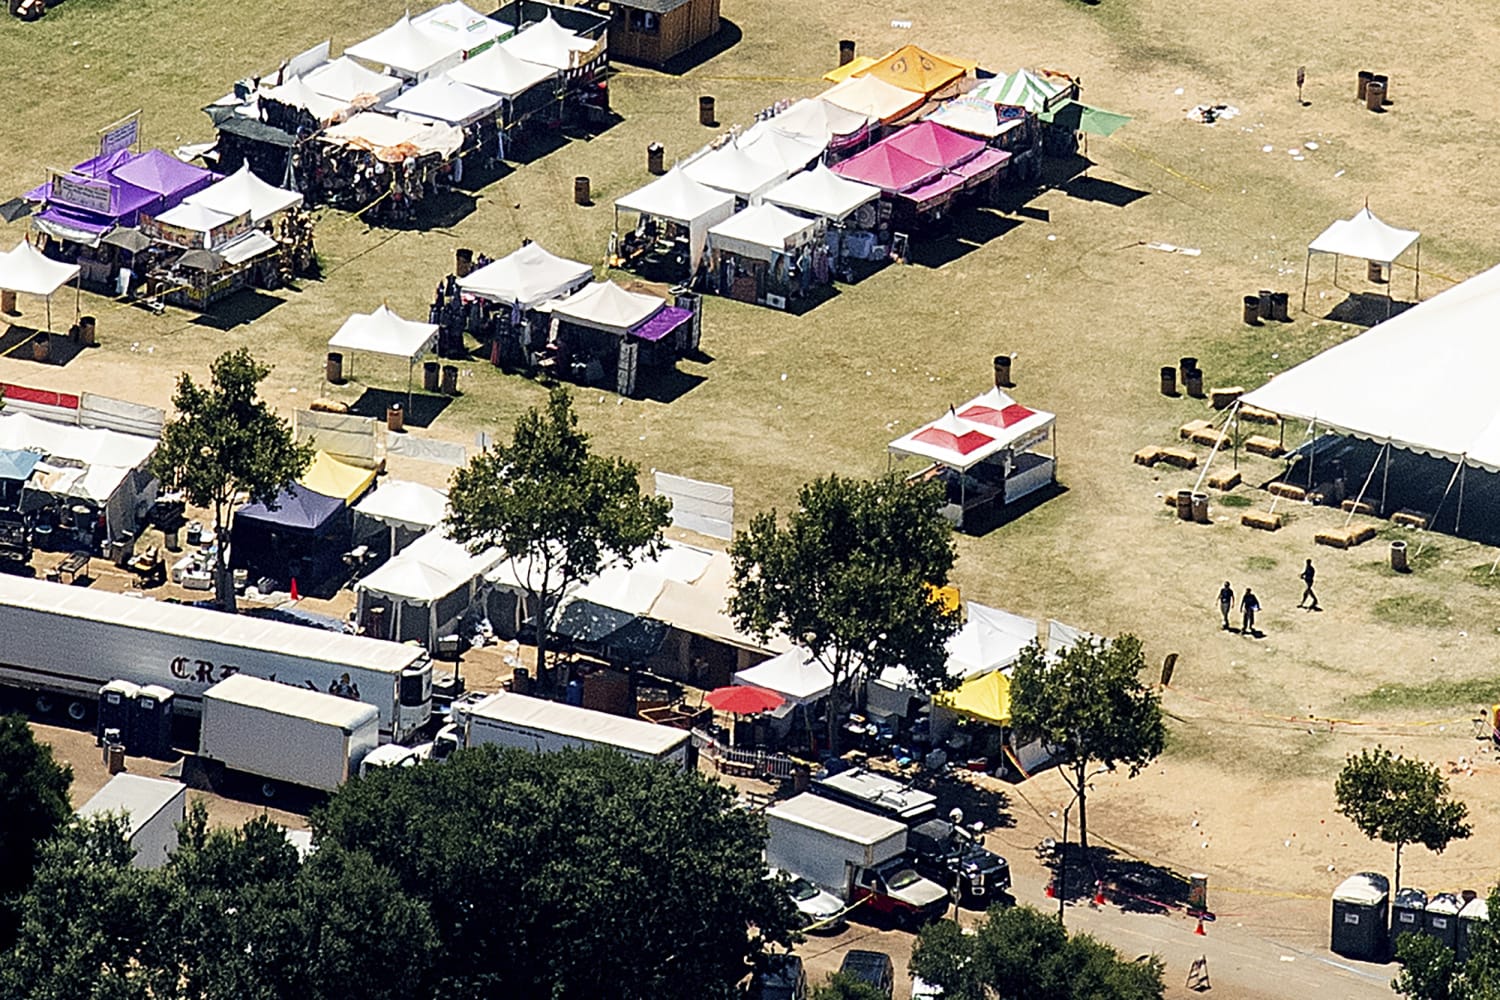 Gilroy festival shooter died of self-inflicted gunshot wound, coroner says